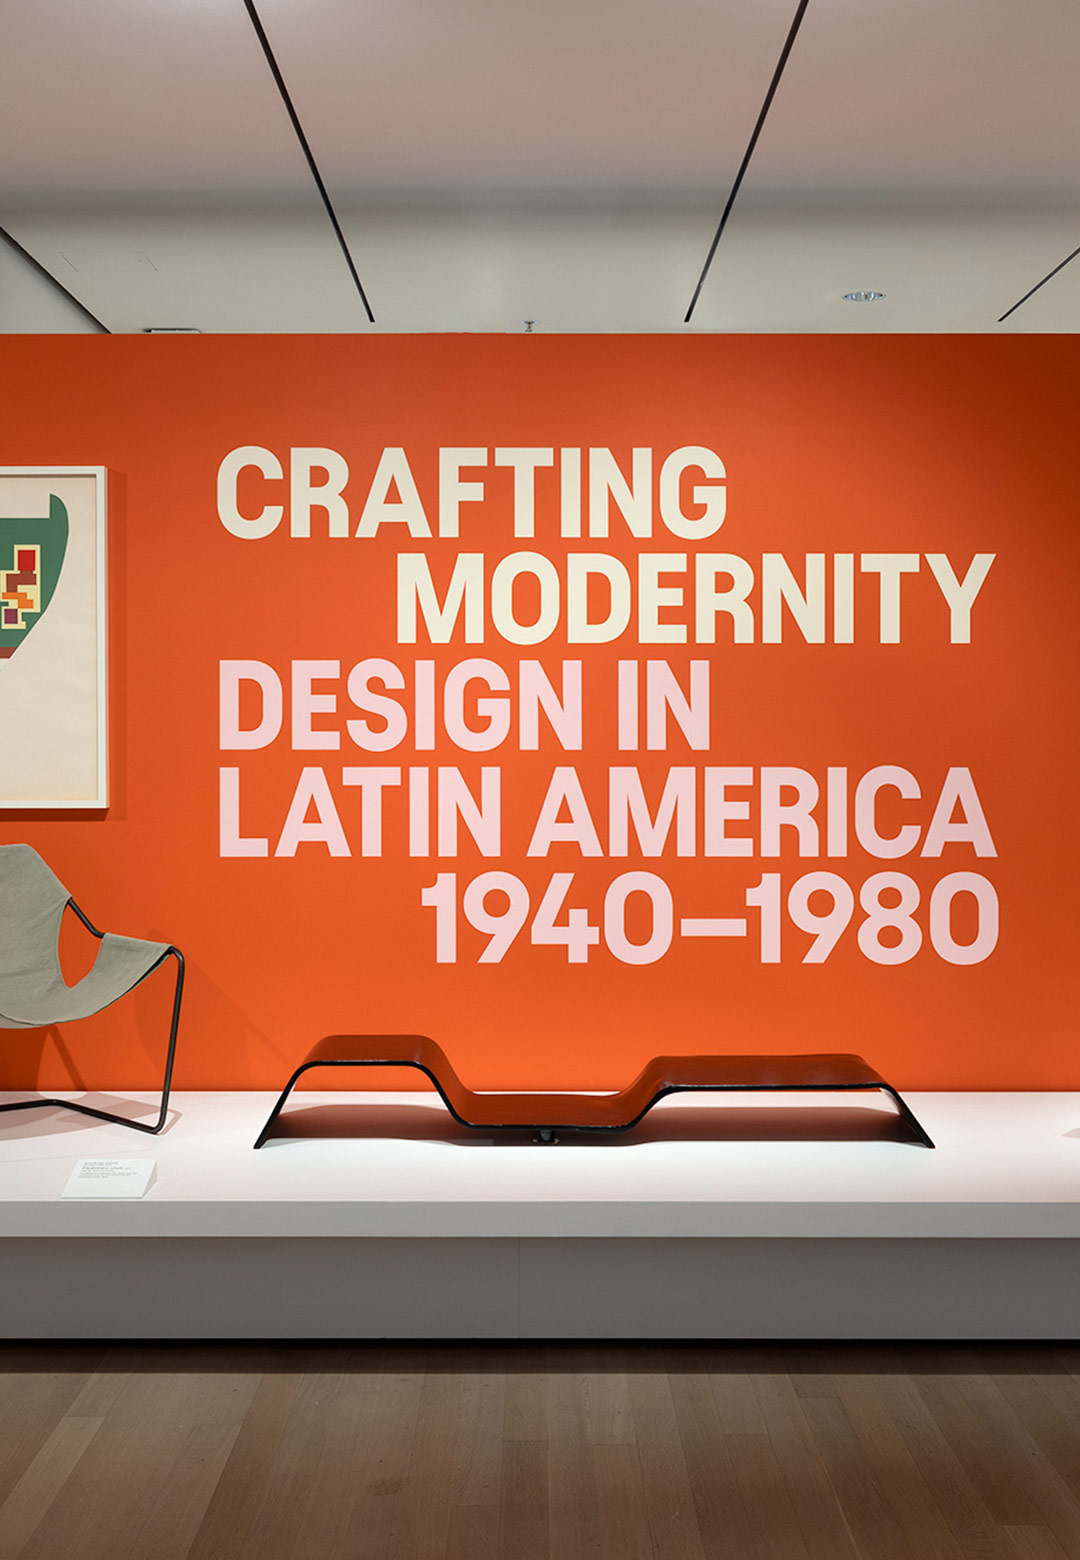 ‘Crafting Modernity’ at the MoMA, New York explores Latin American modernity